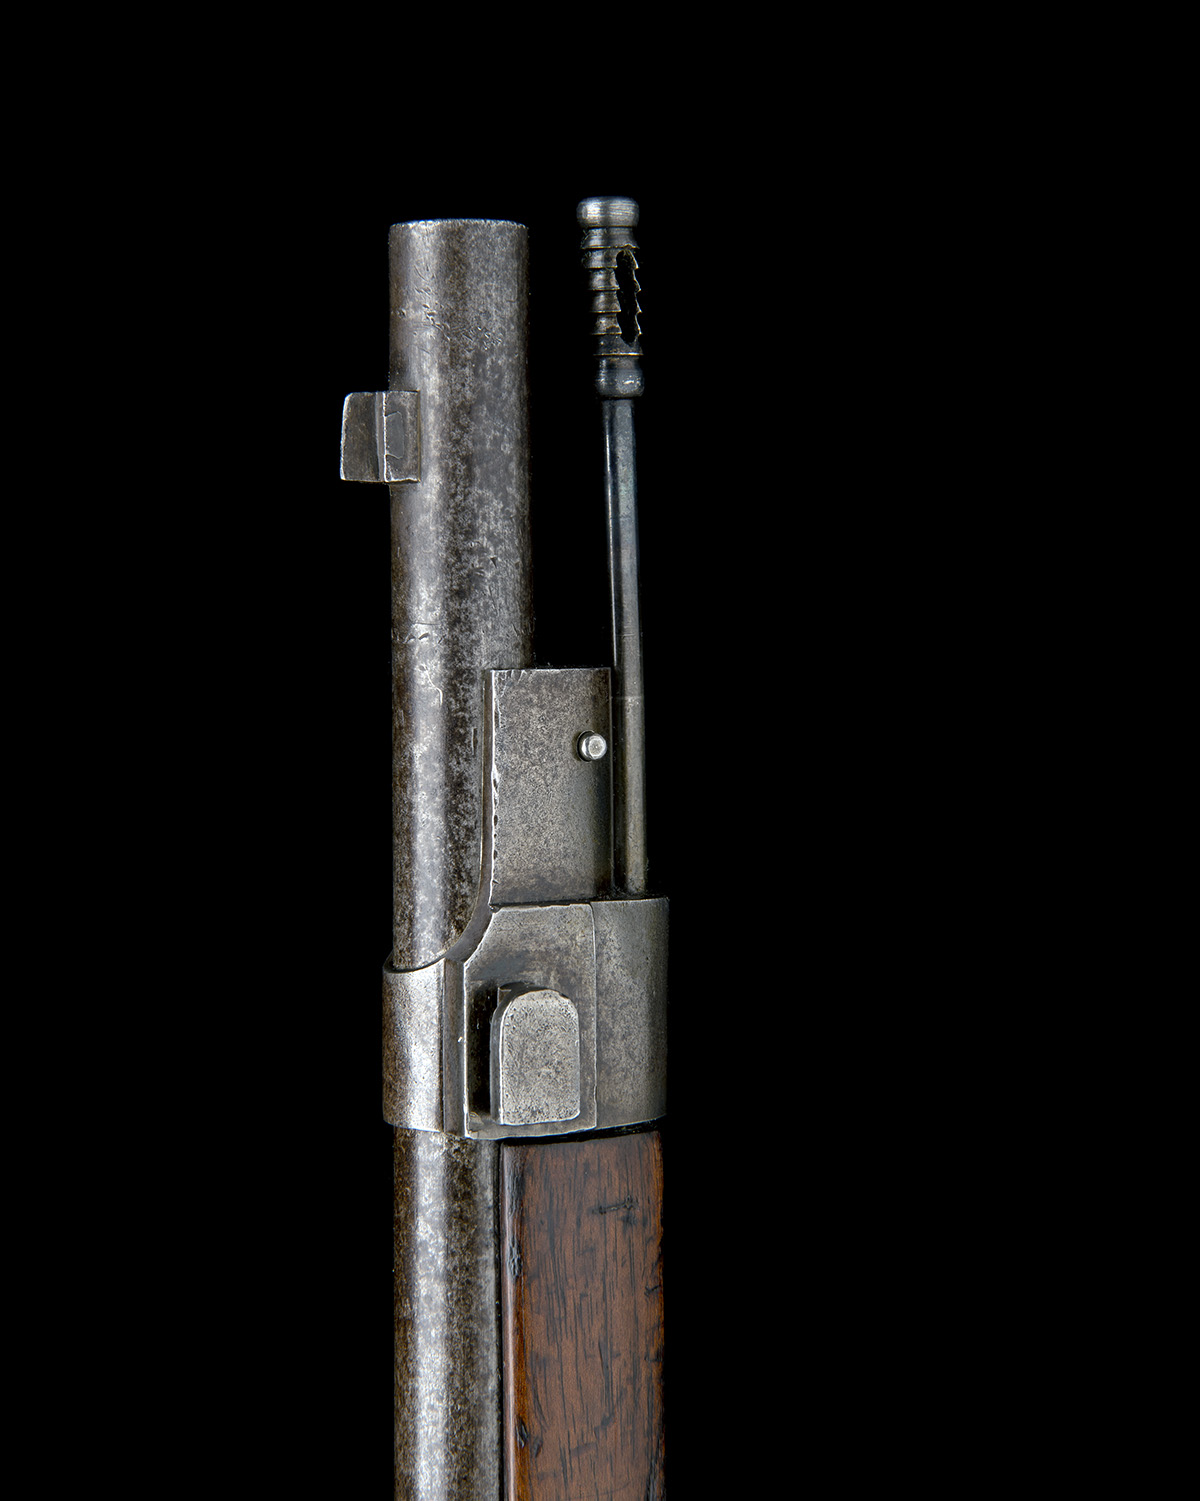 DANZIG ARSENAL GERMANY AN 11mm (MAUSER COMMISSION) BOLT-ACTION SERVICE-RIFLE, MODEL 'M71 MAUSER', - Image 5 of 7